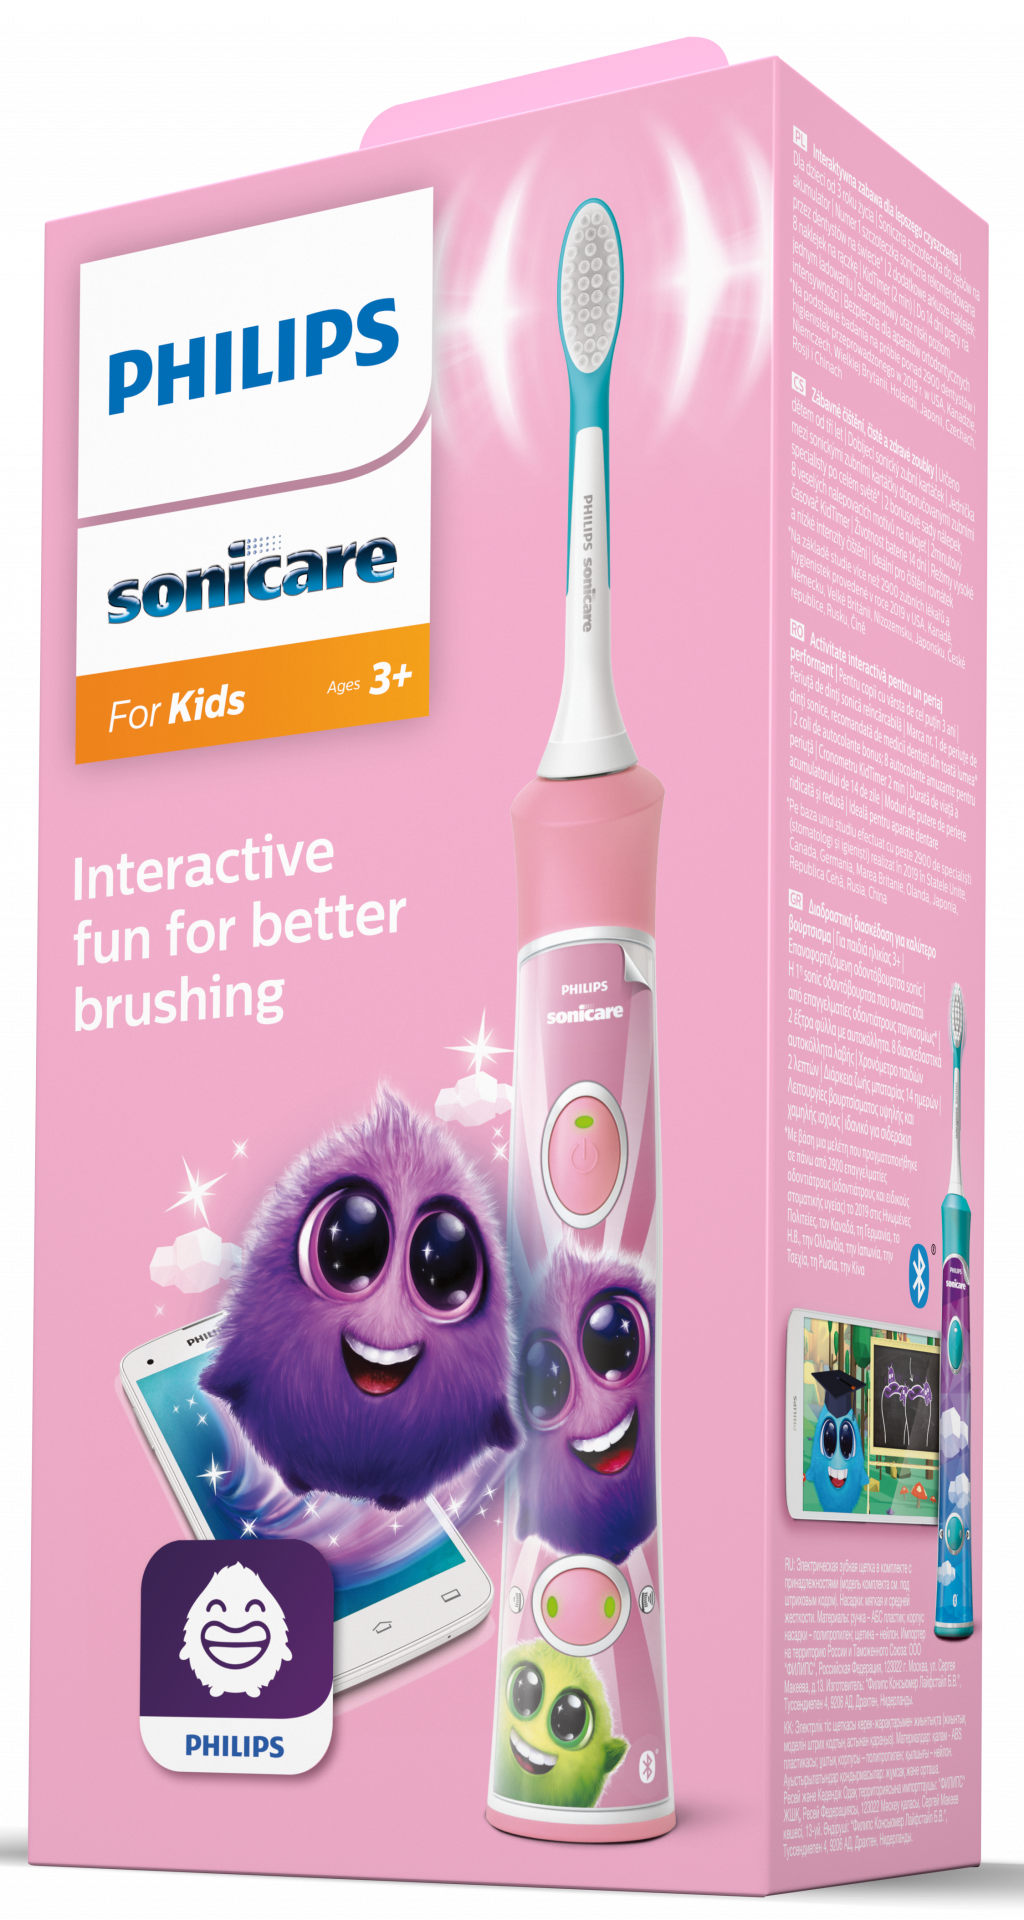 Philips Sonicare For Kids HX6322/04 - blue